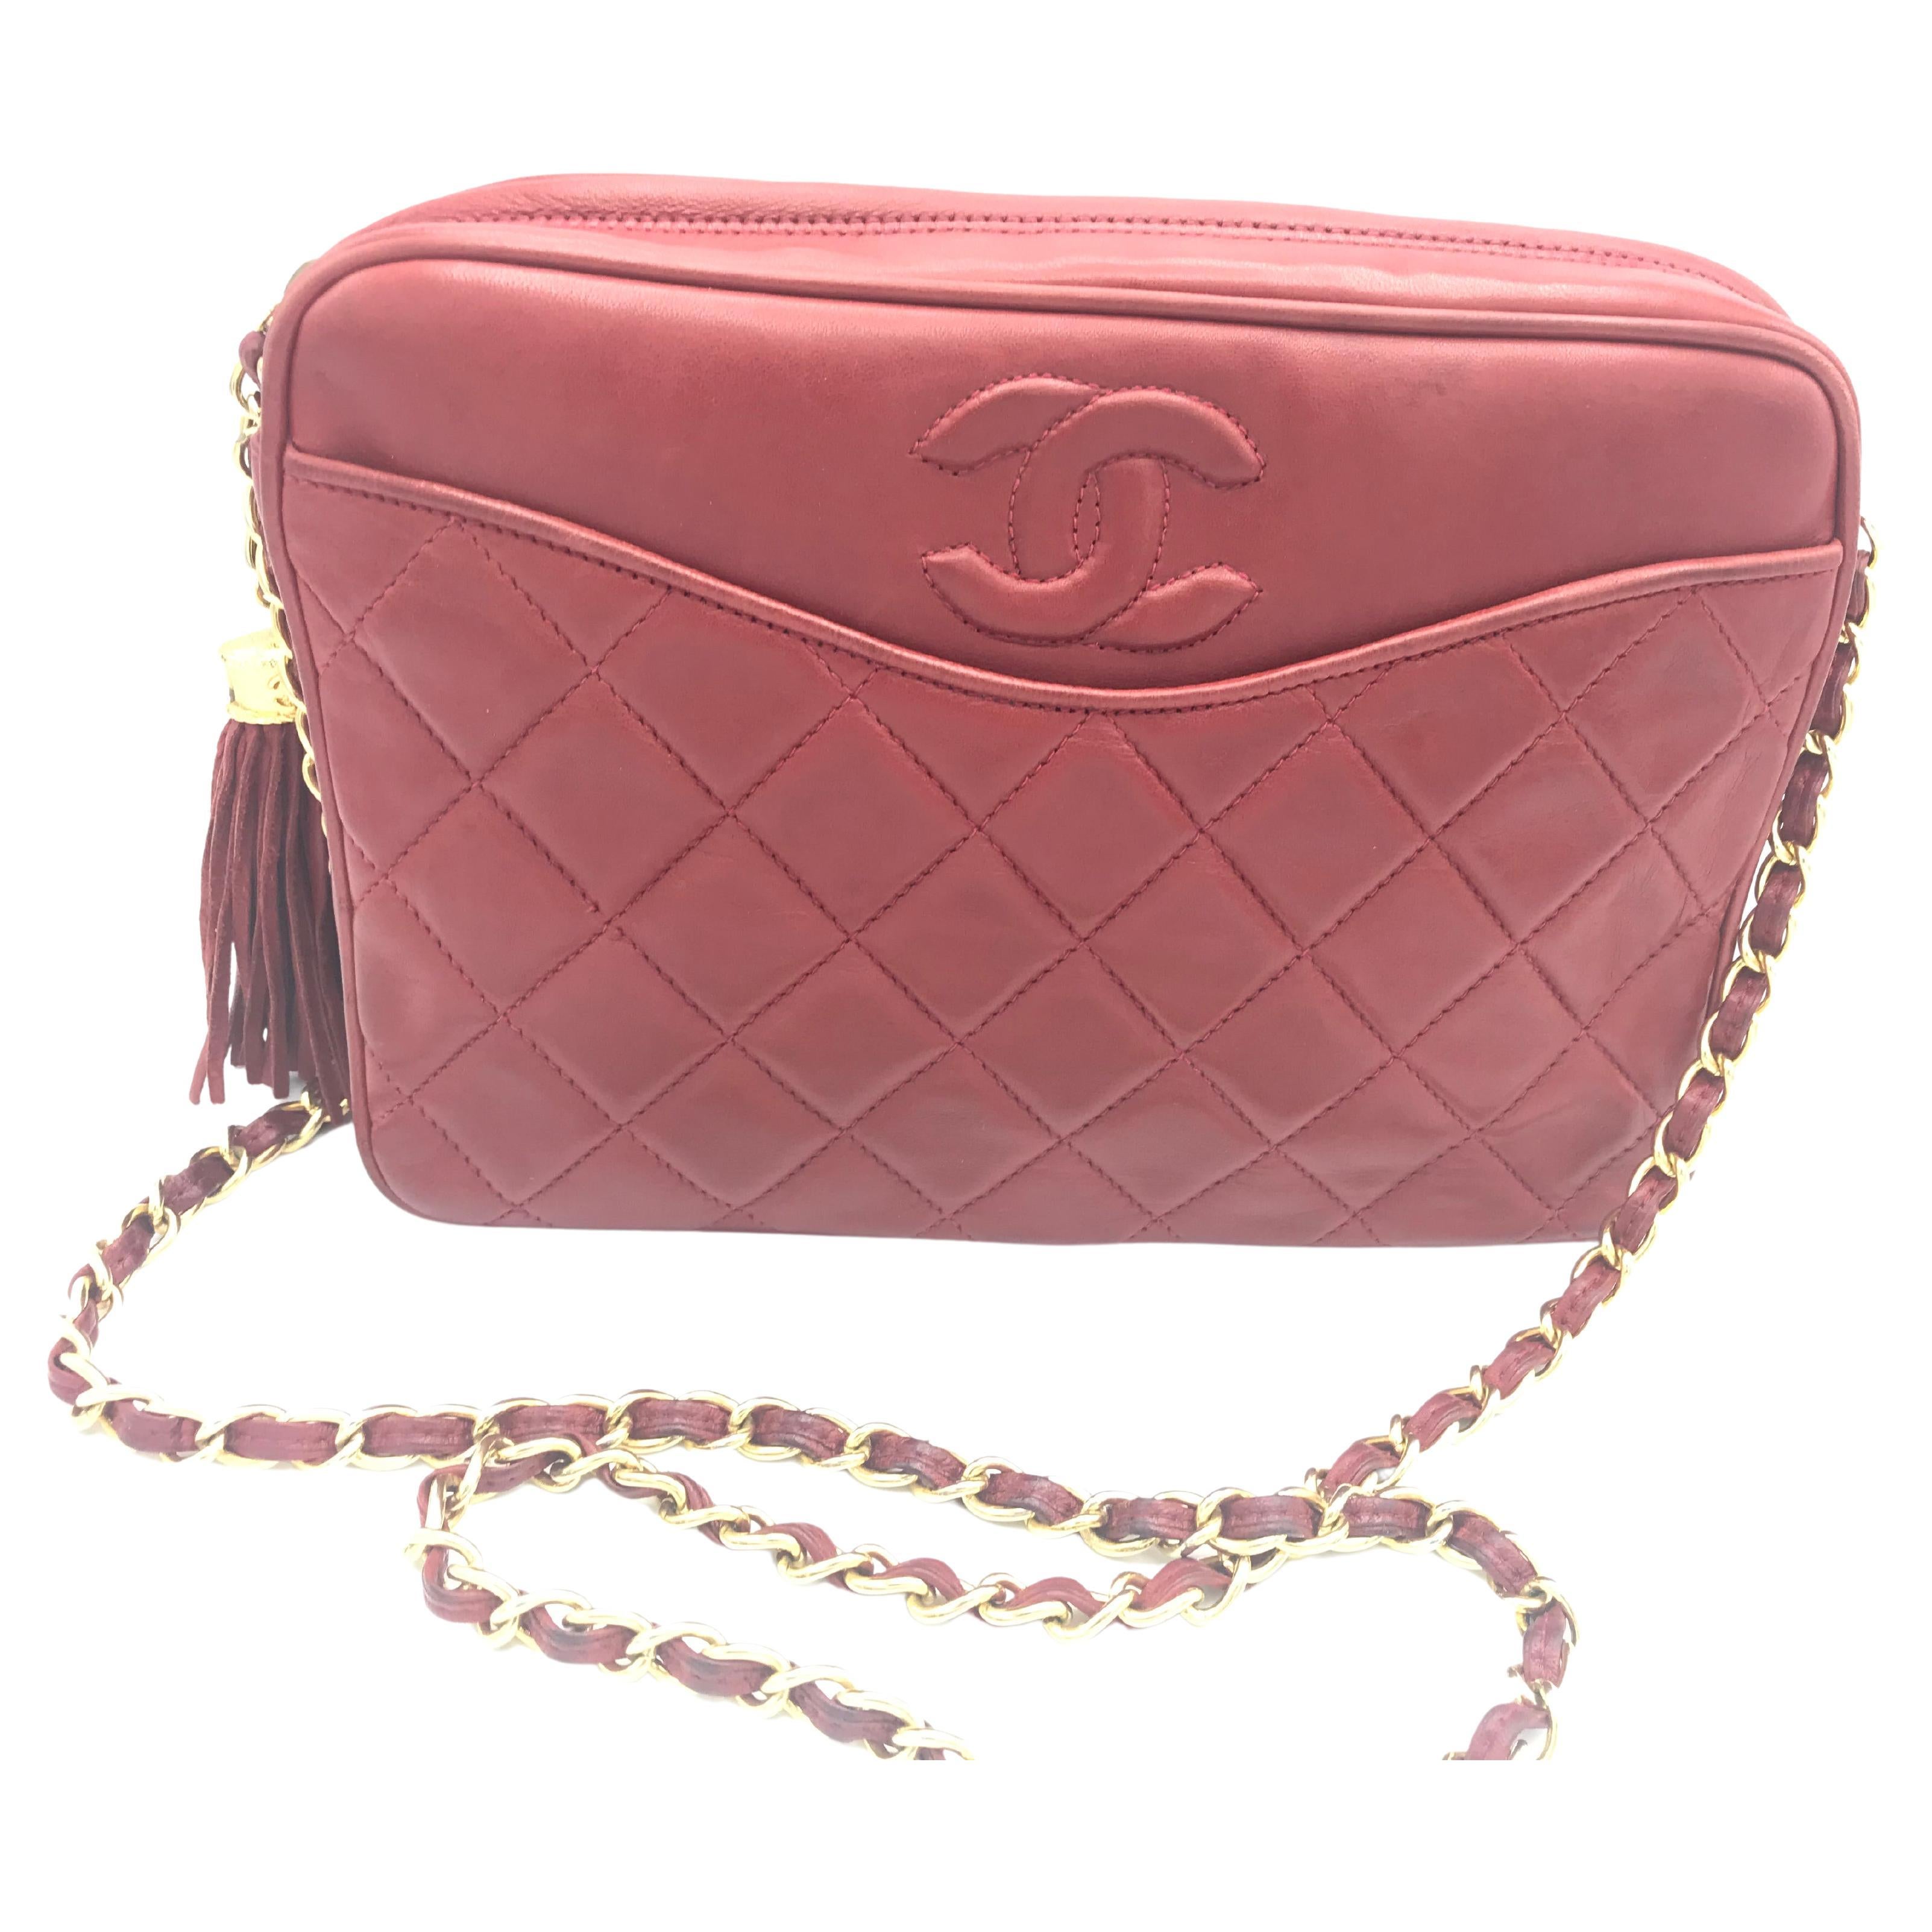 Chanel Vintage Quilted Lambskin Bag